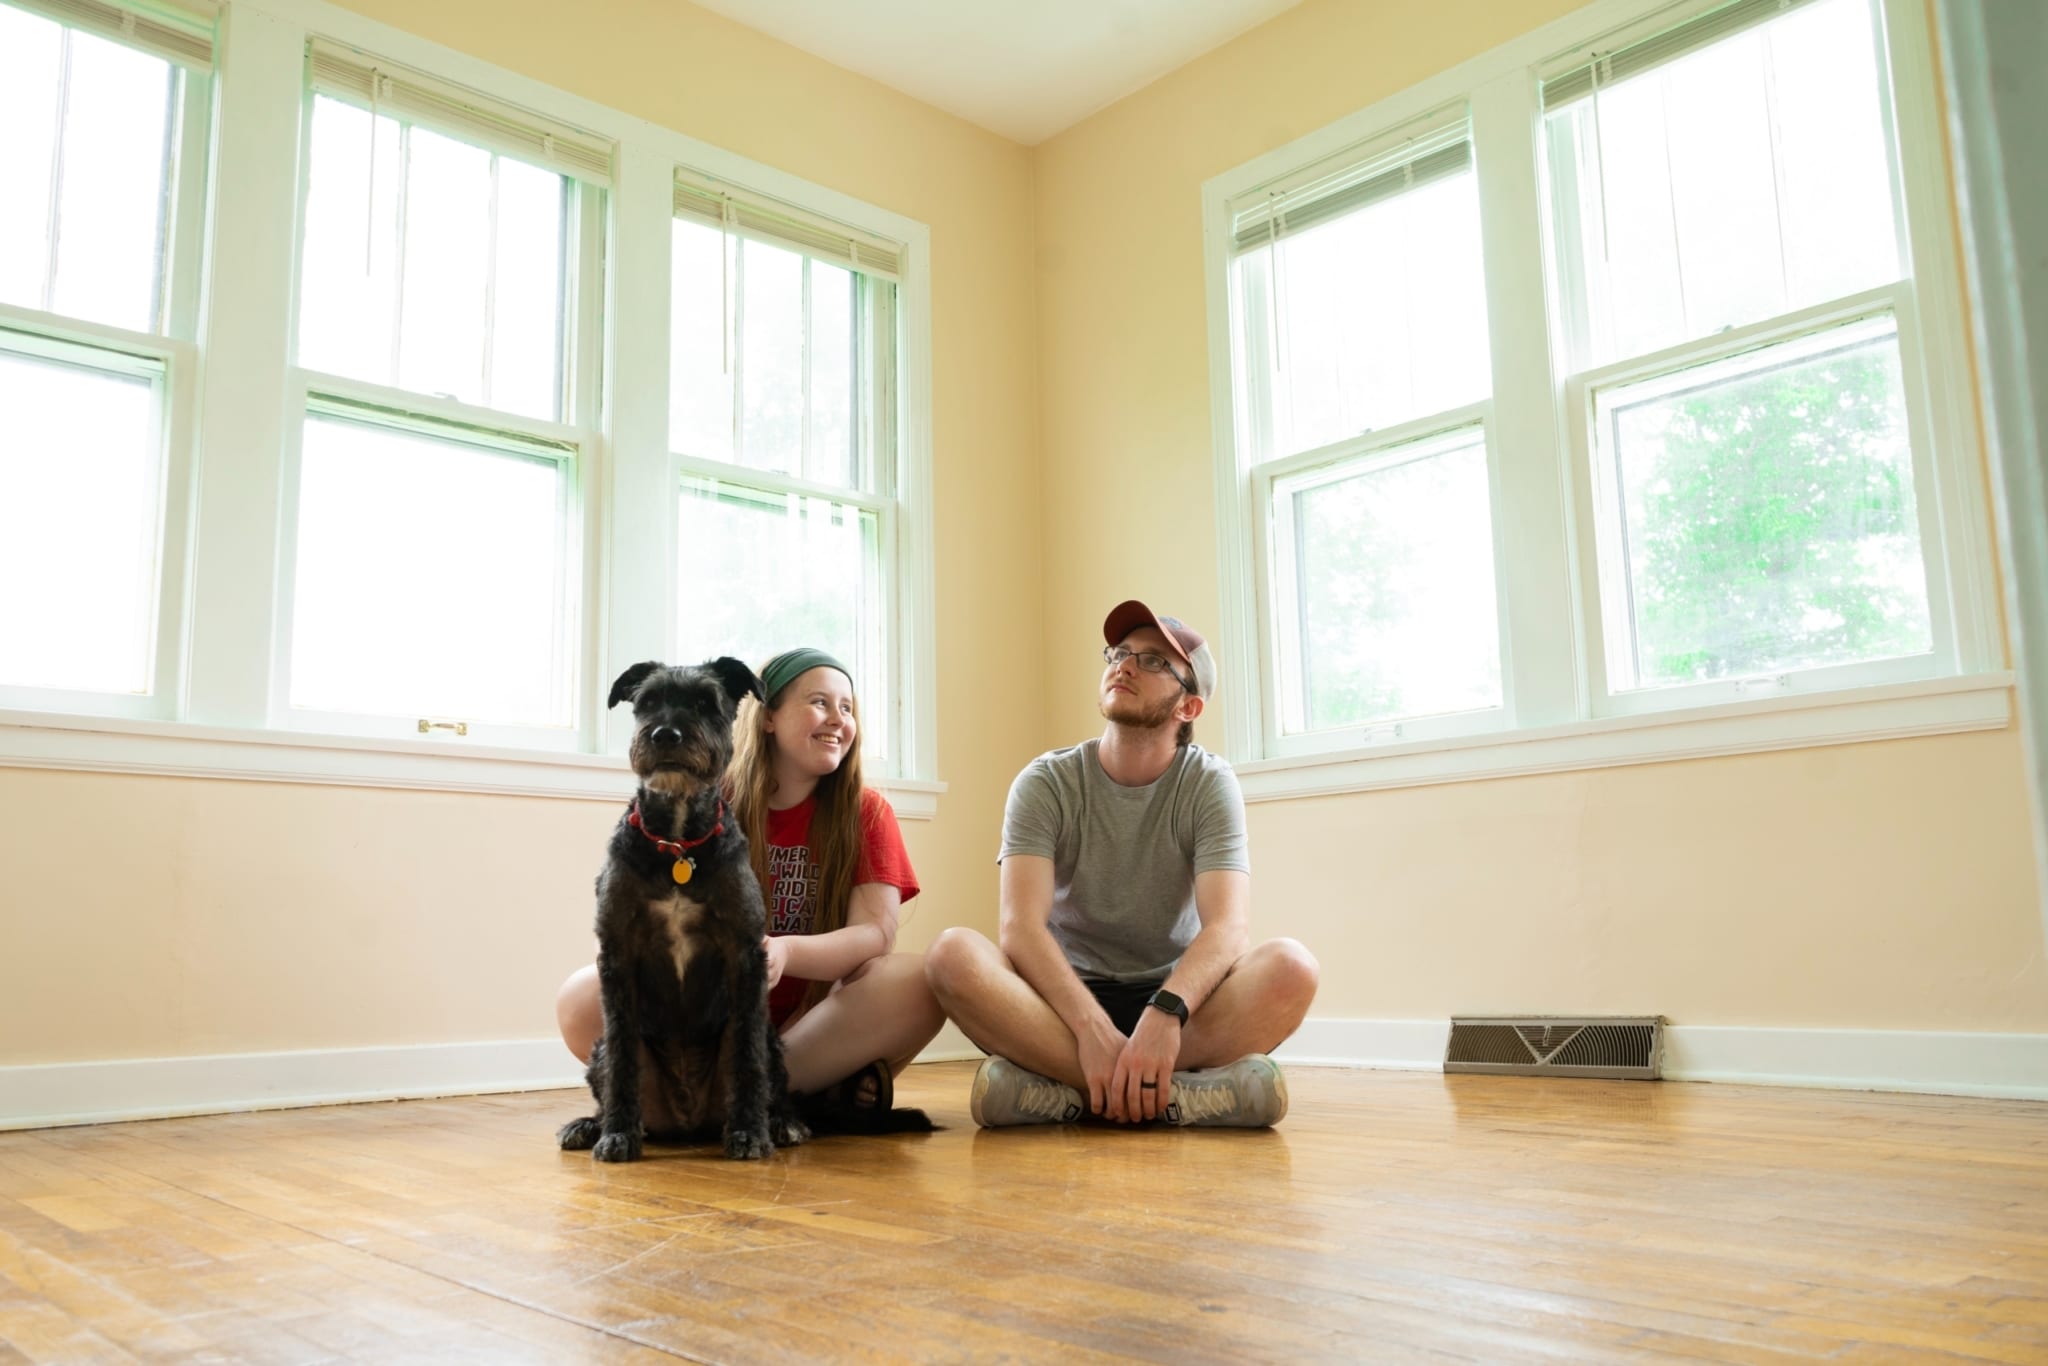 7 Things to Do After Moving into a New Home